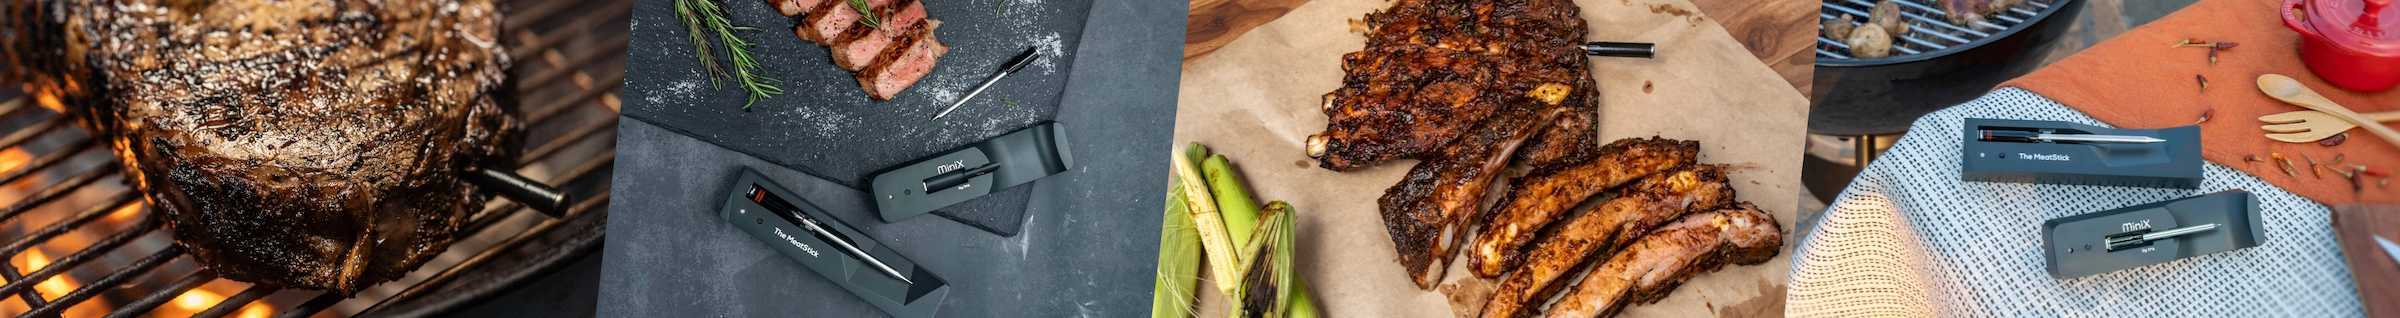 Grilling, Smoking and BBQ with The MeatStick Wireless Meat Thermometer